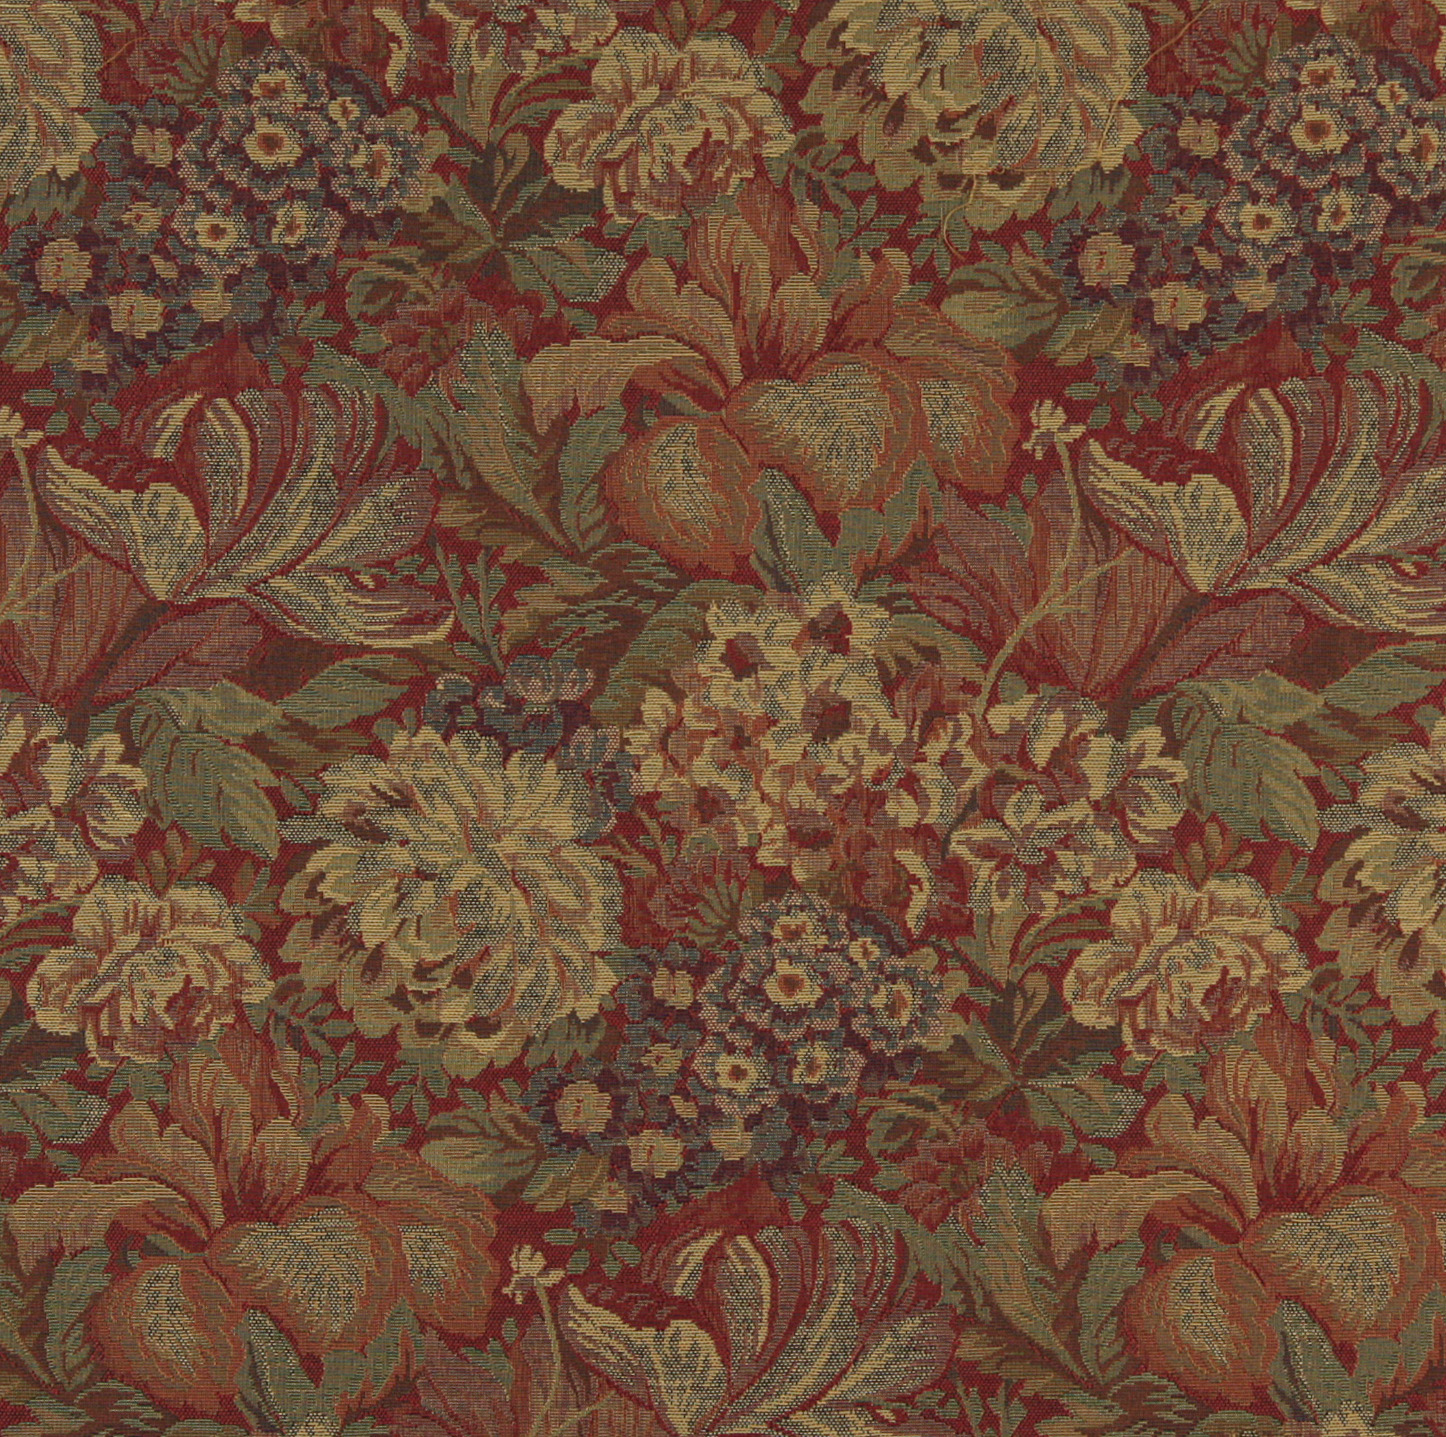 Beige and Burgundy Victorian Floral Garden Tapestry Upholstery Fabric